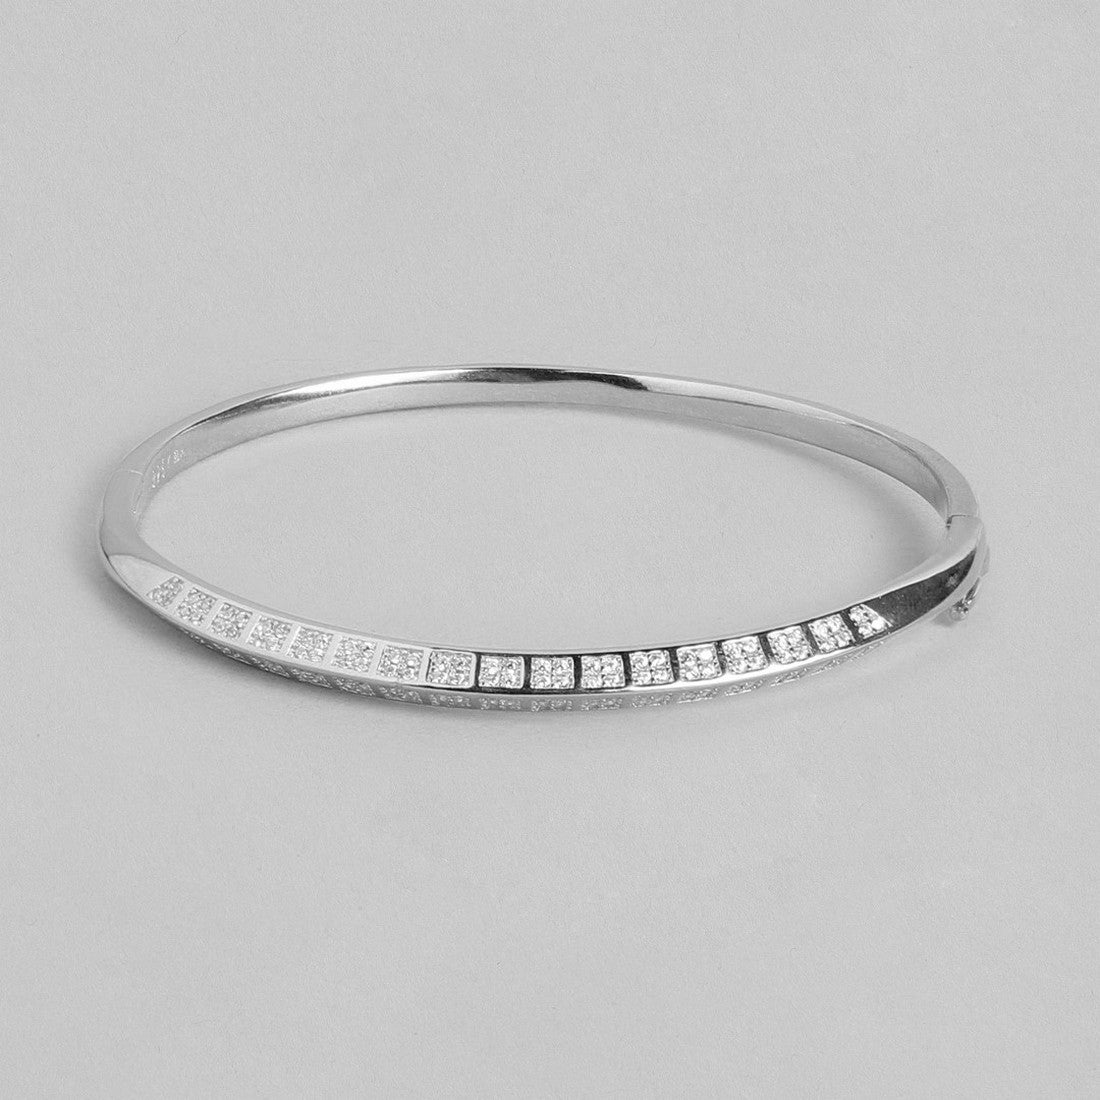 Classy Solitaire 925 Sterling Silver Bracelet